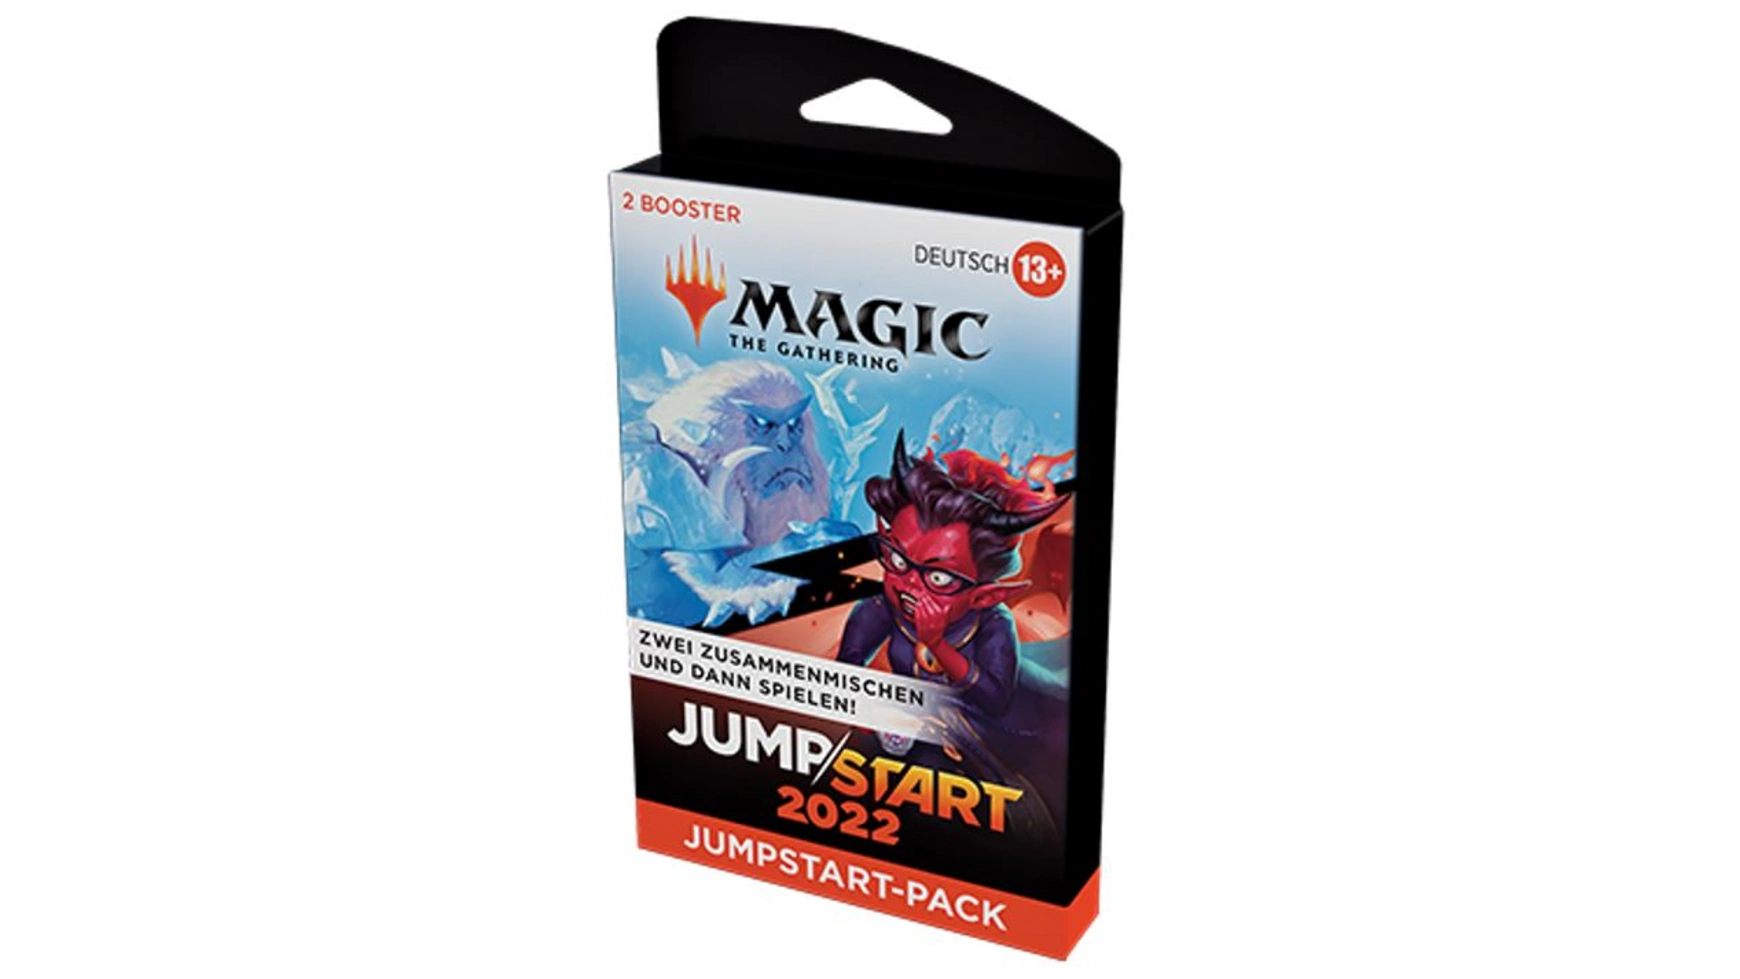 Magic The Gathering Jumpstart Booster (на немецком языке), 2 шт